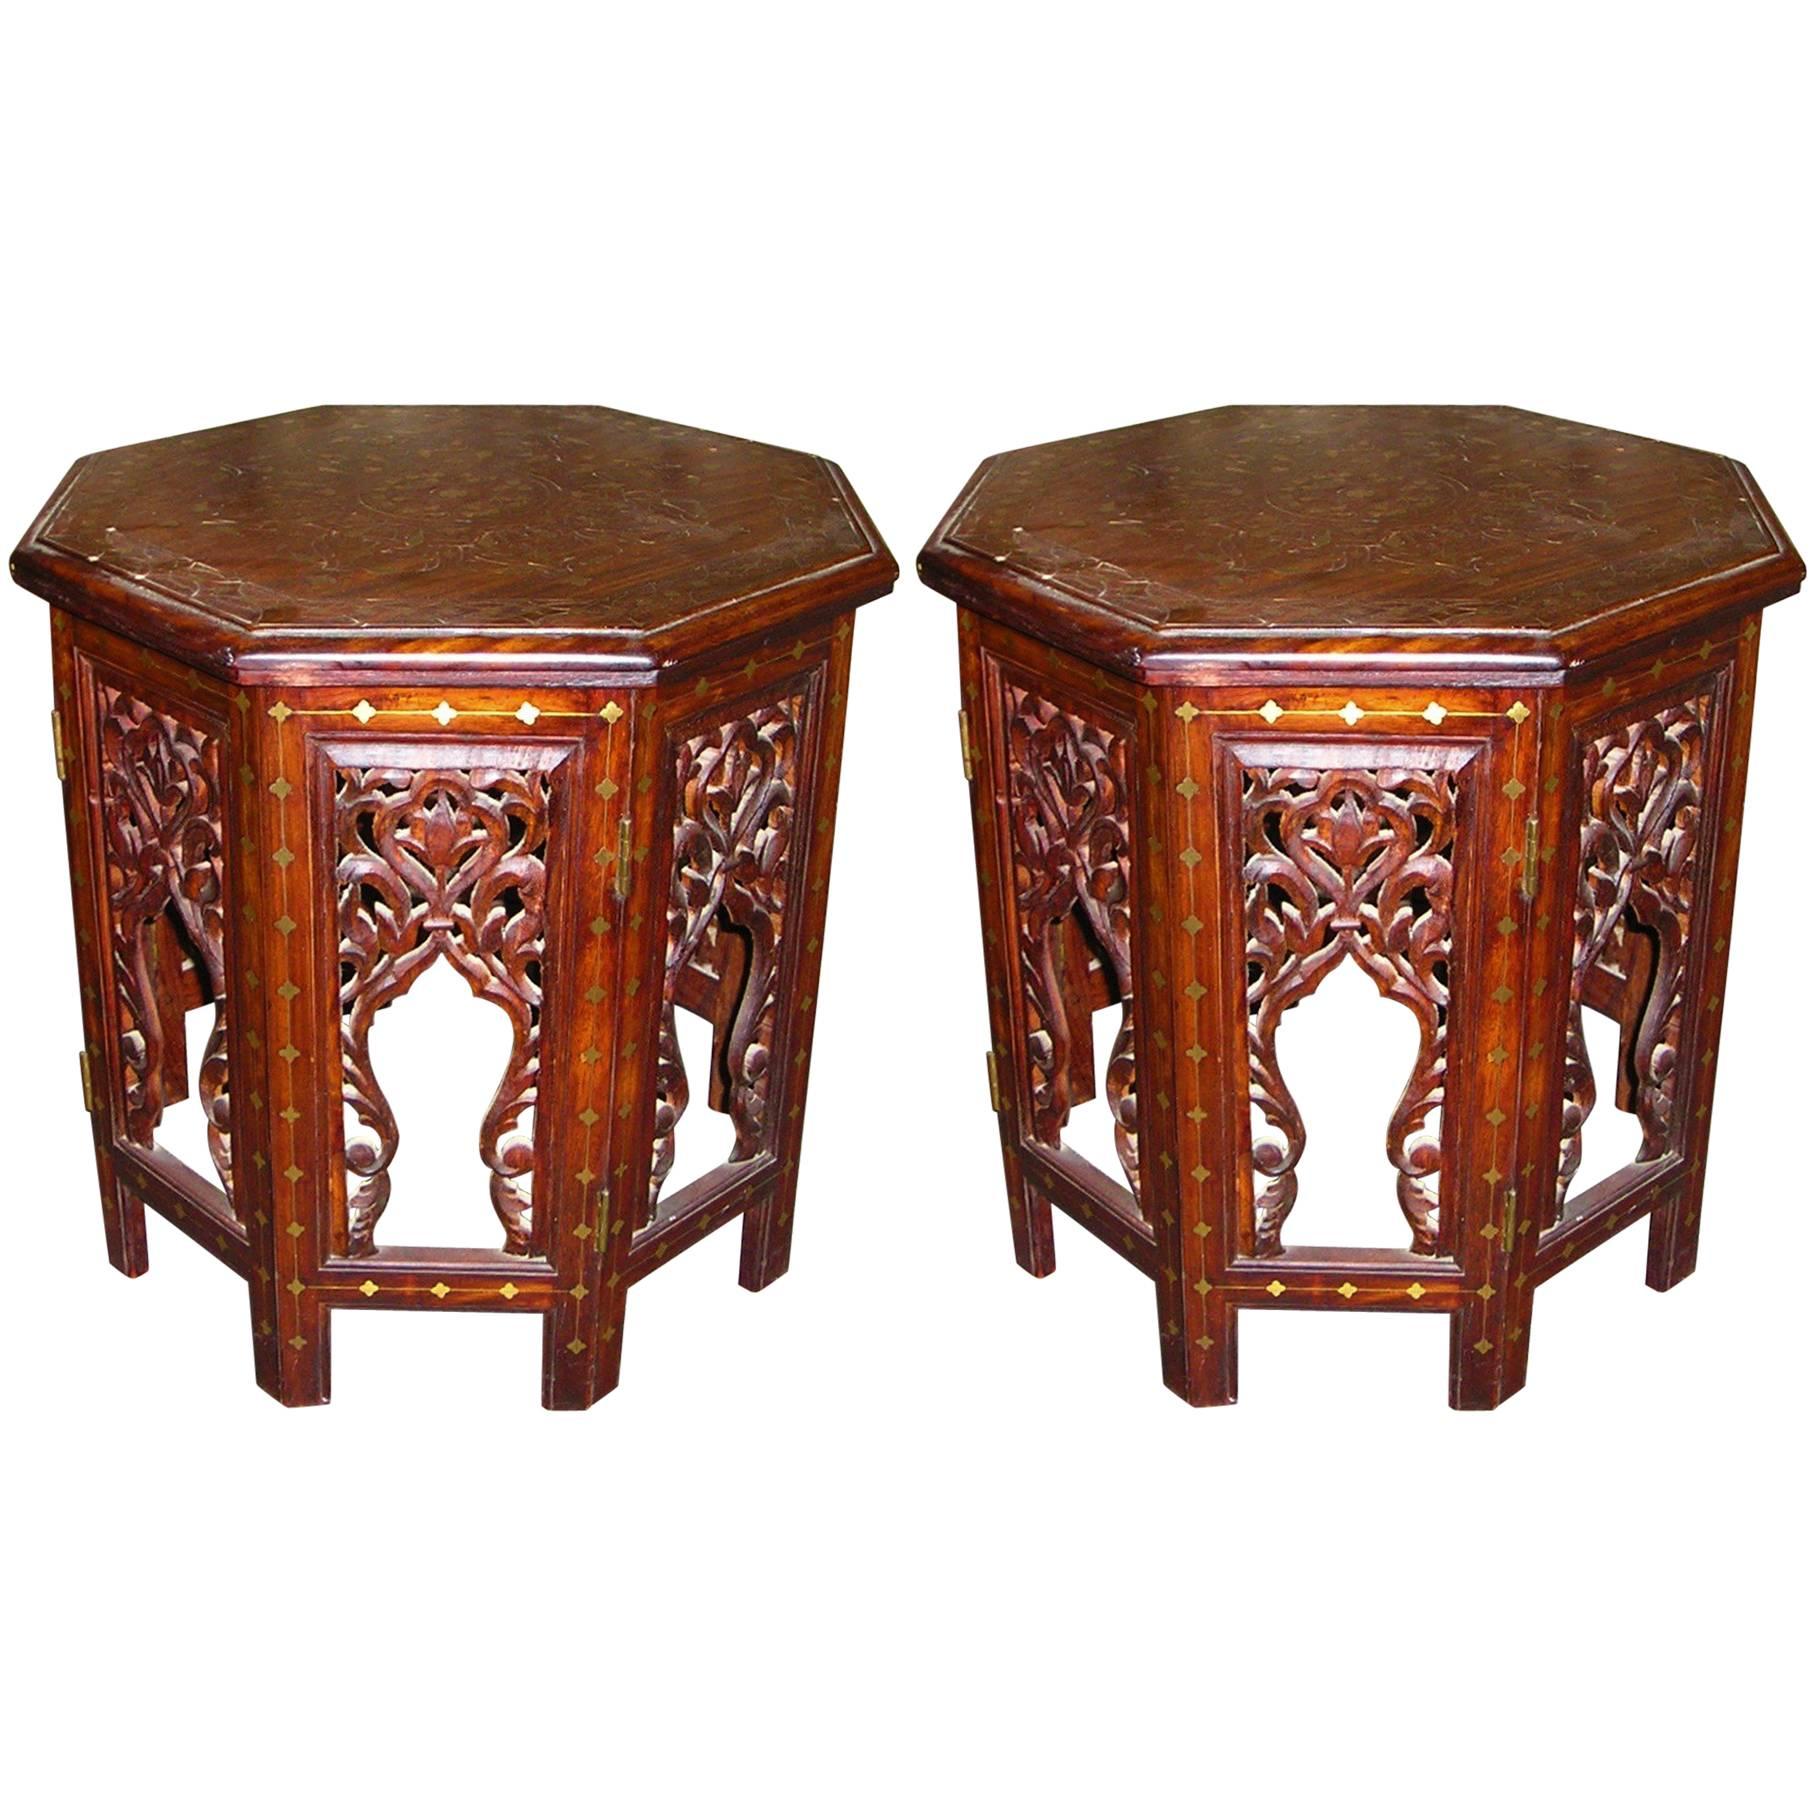 Pair of Inlaid Hand-Carved Anglo-Indian Side or End Tables with Brass and Copper